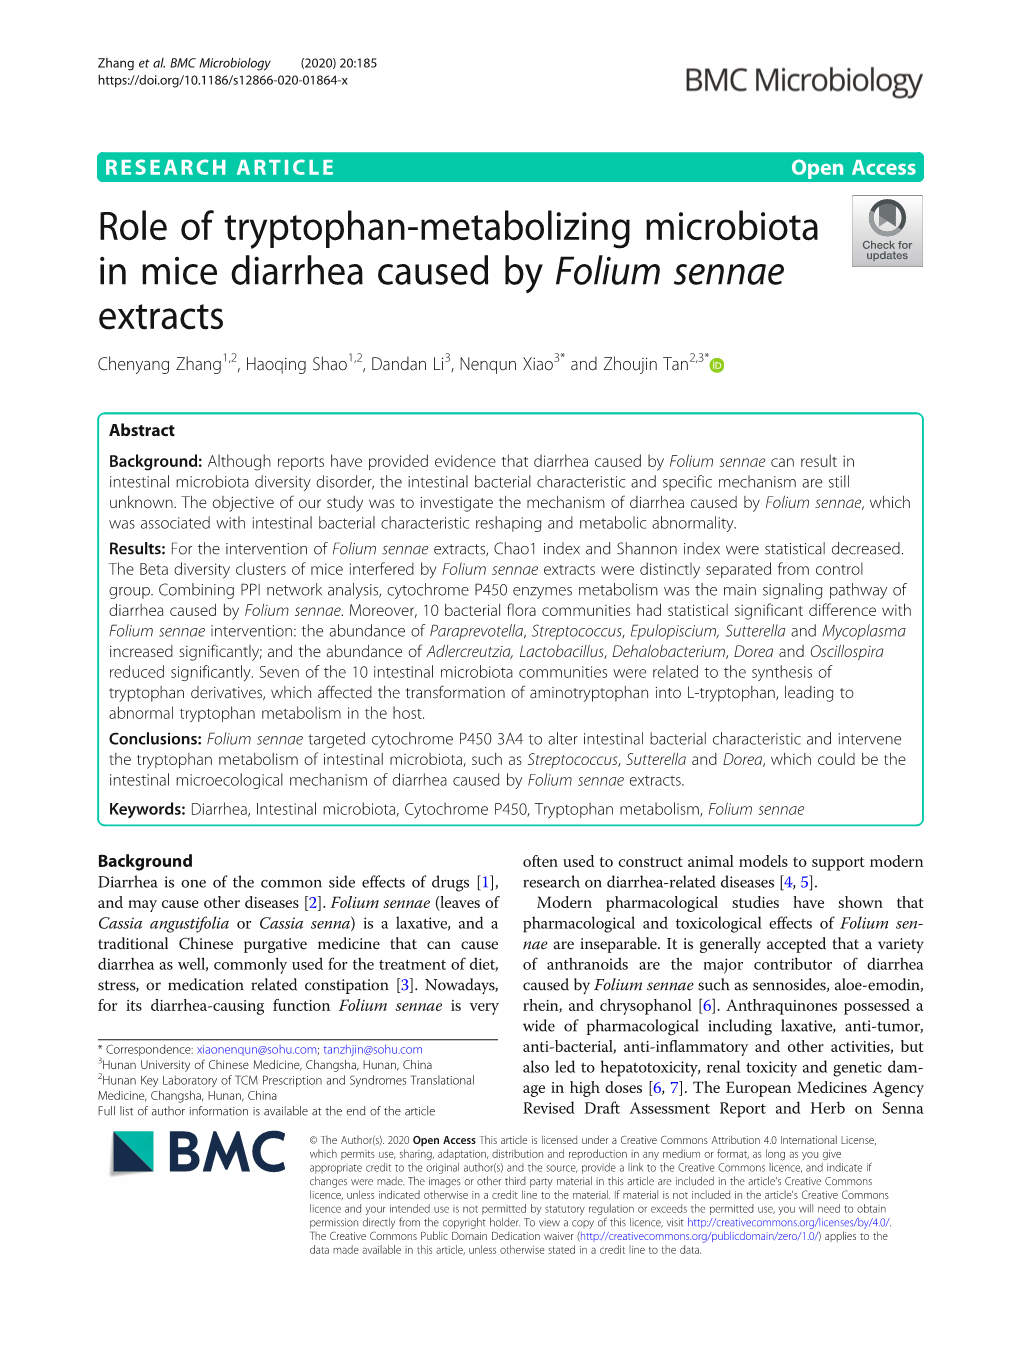 Role of Tryptophan-Metabolizing Microbiota in Mice Diarrhea Caused